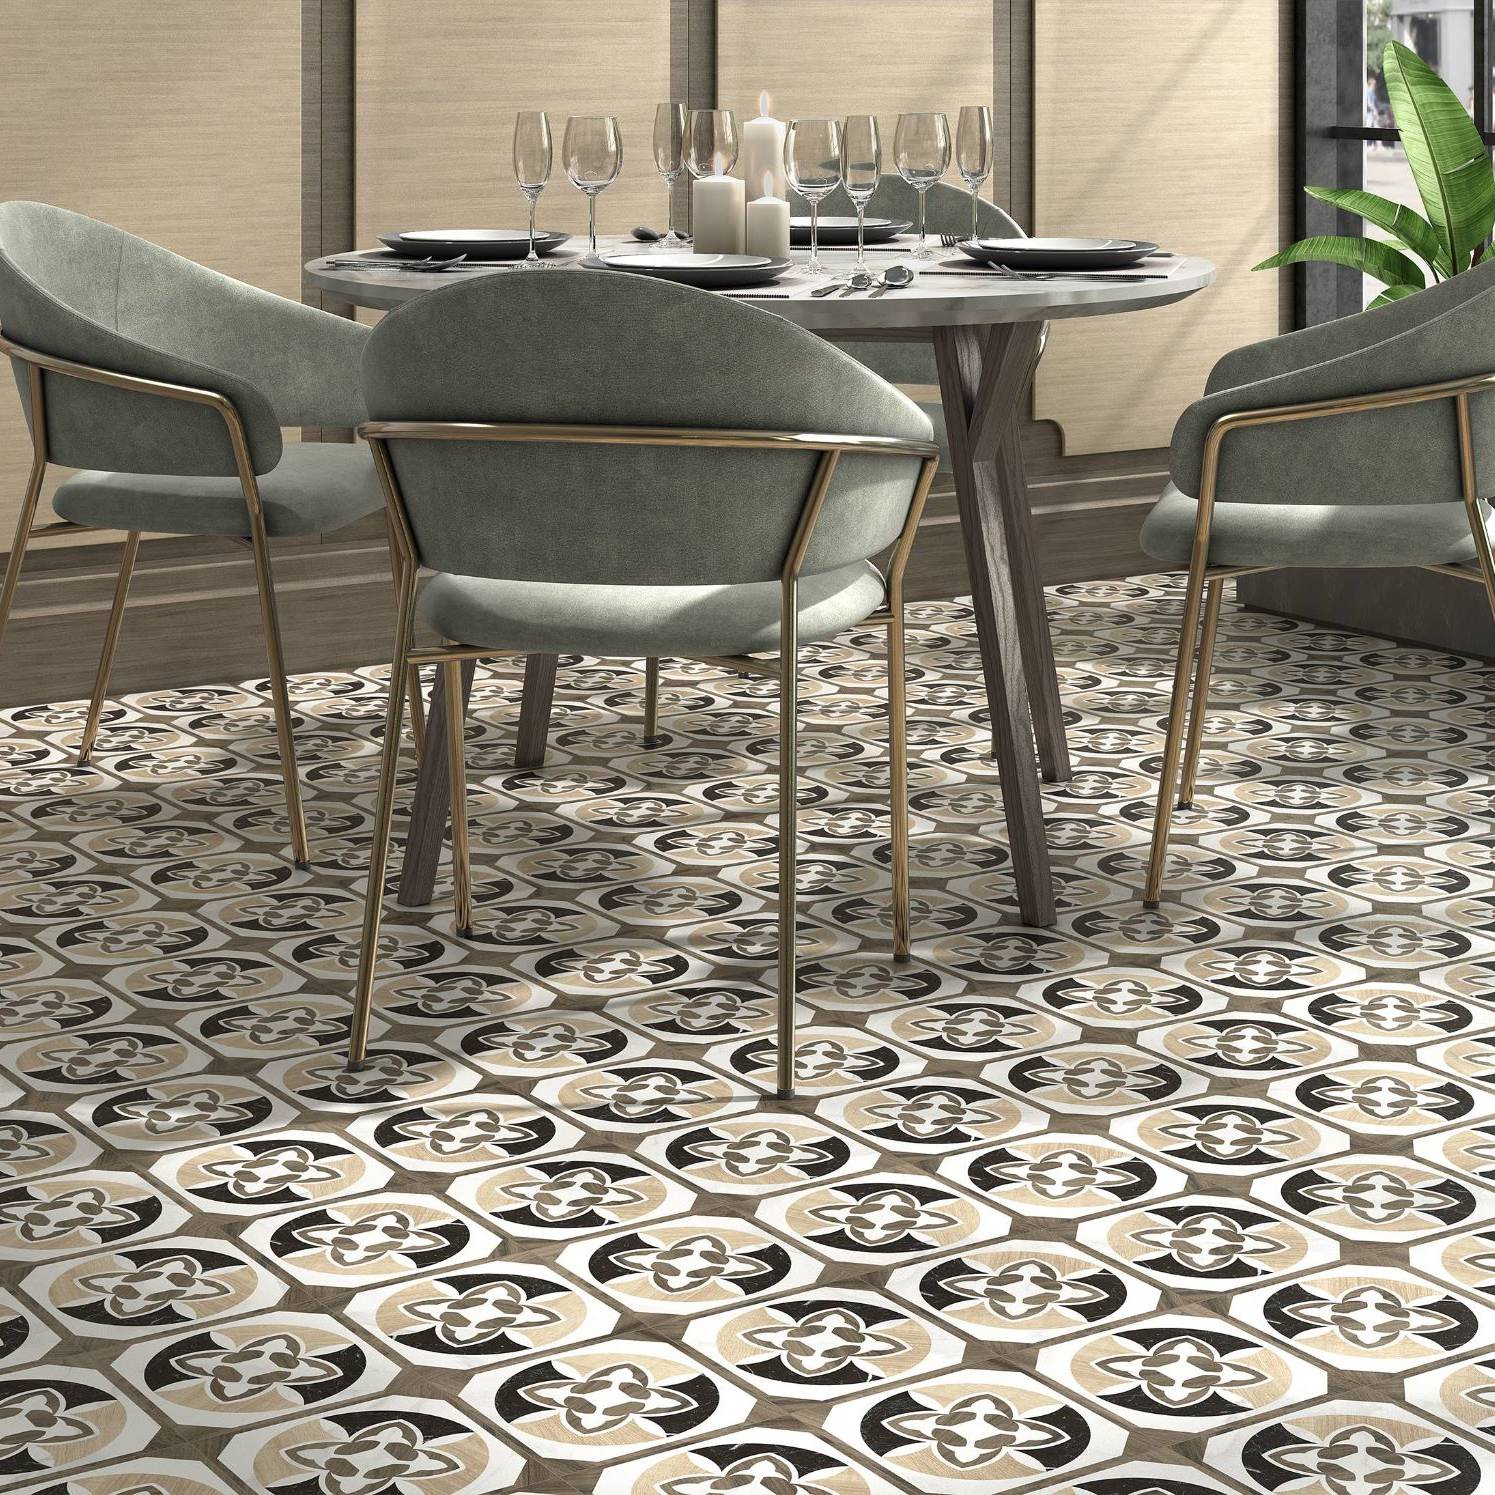 Cuban_Heritage_16_G | Stones & More | Finest selection of Mosaics, Glass, Tile and Stone